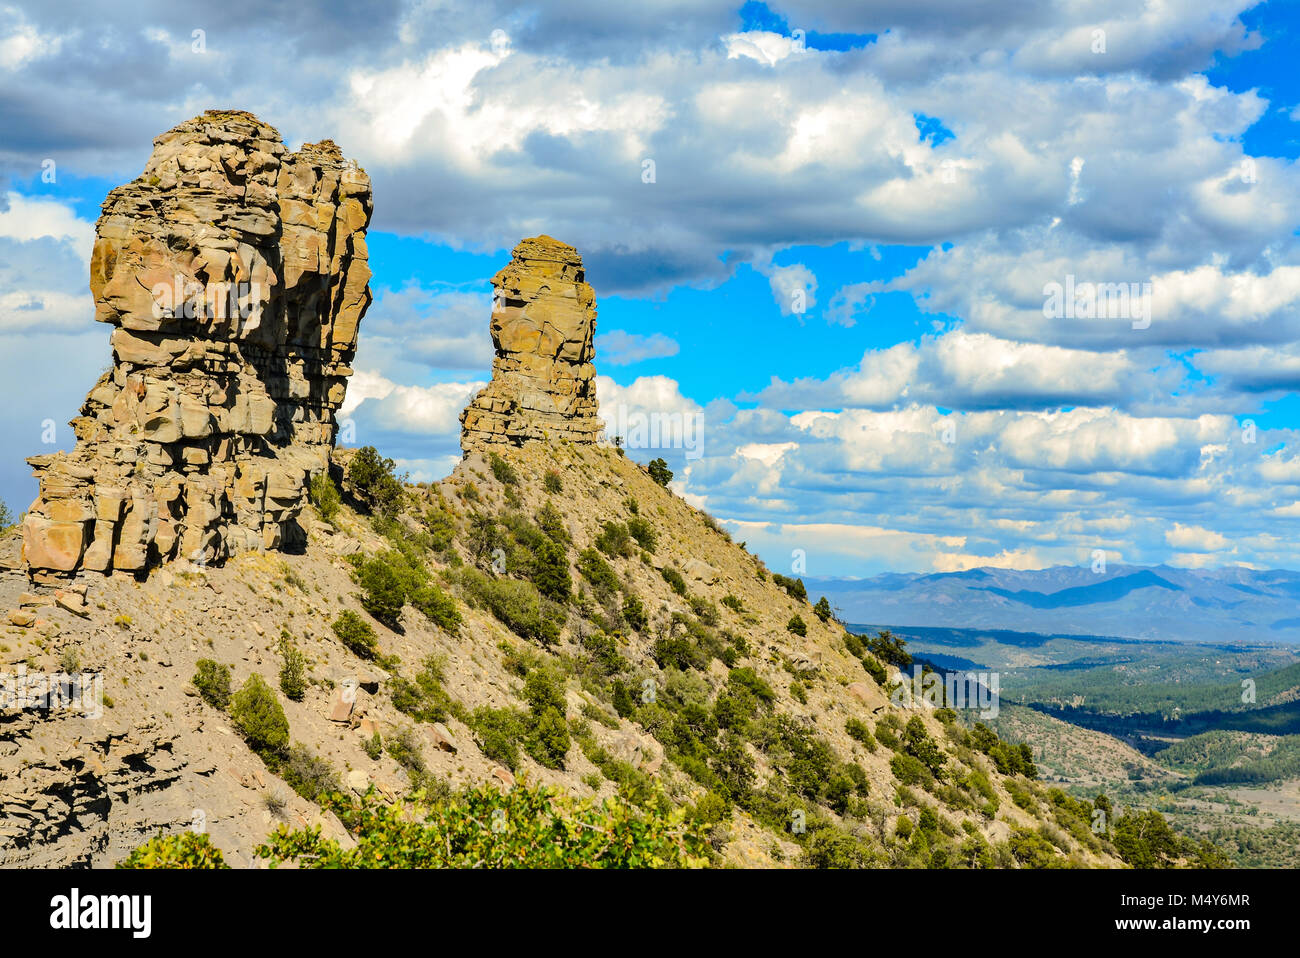 Horizontal view of two spires at Chimney Rock National Monument in San Juan National Forest in southwestern Colorado. Stock Photo